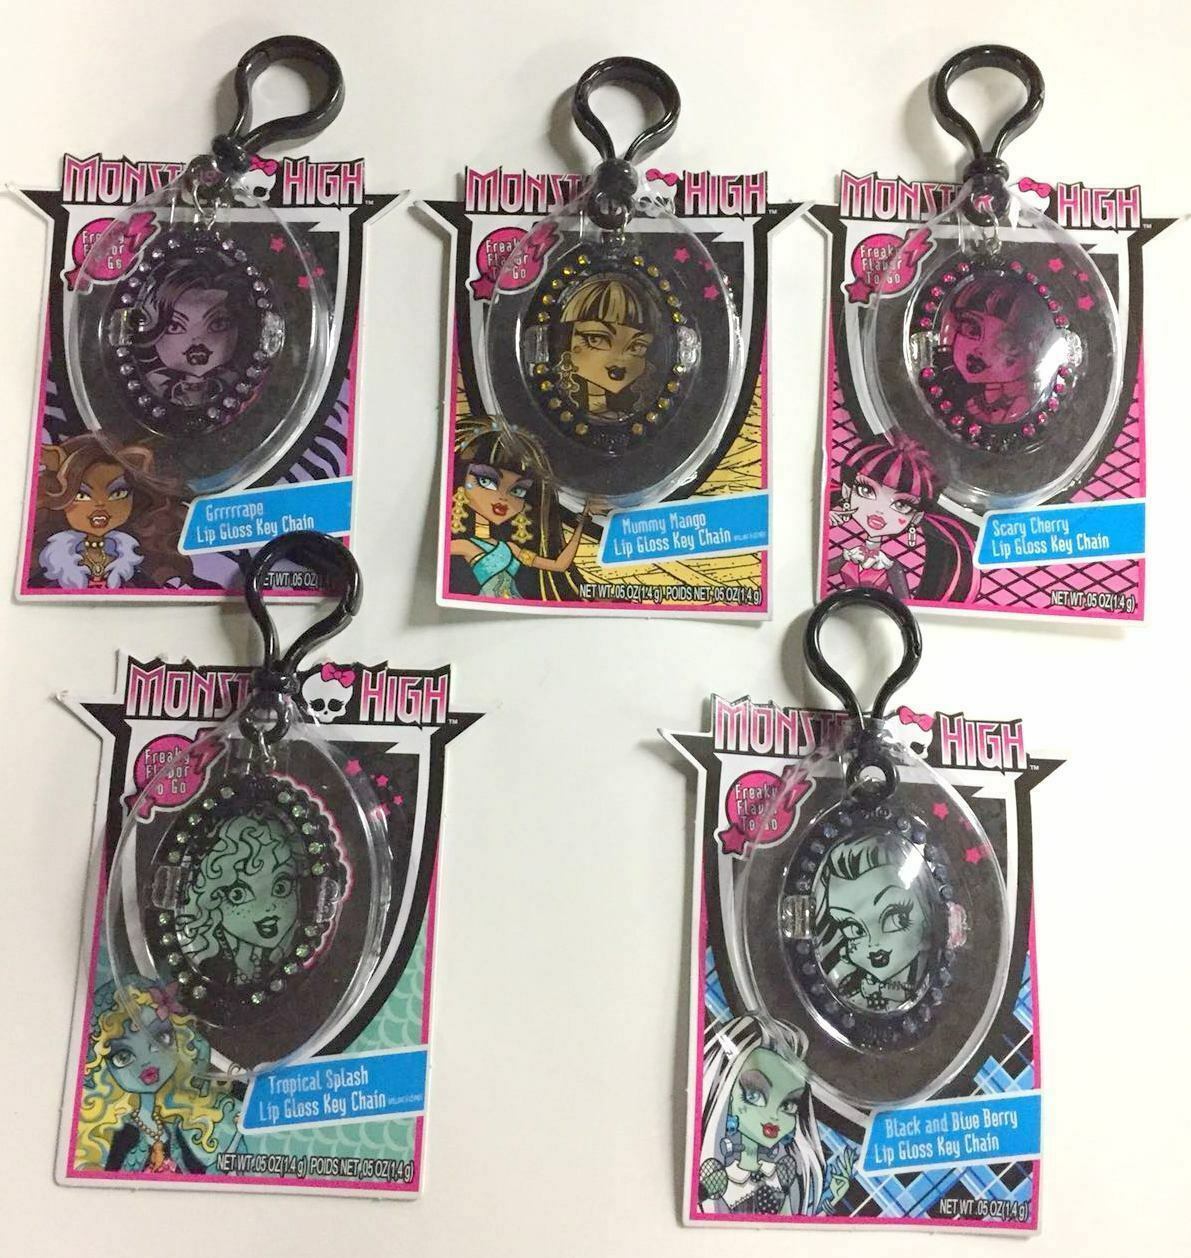 MONSTER HIGH Lip Gloss Keychain Lot of 10 PACK - HALLOWEEN -Gifts - Party Favor